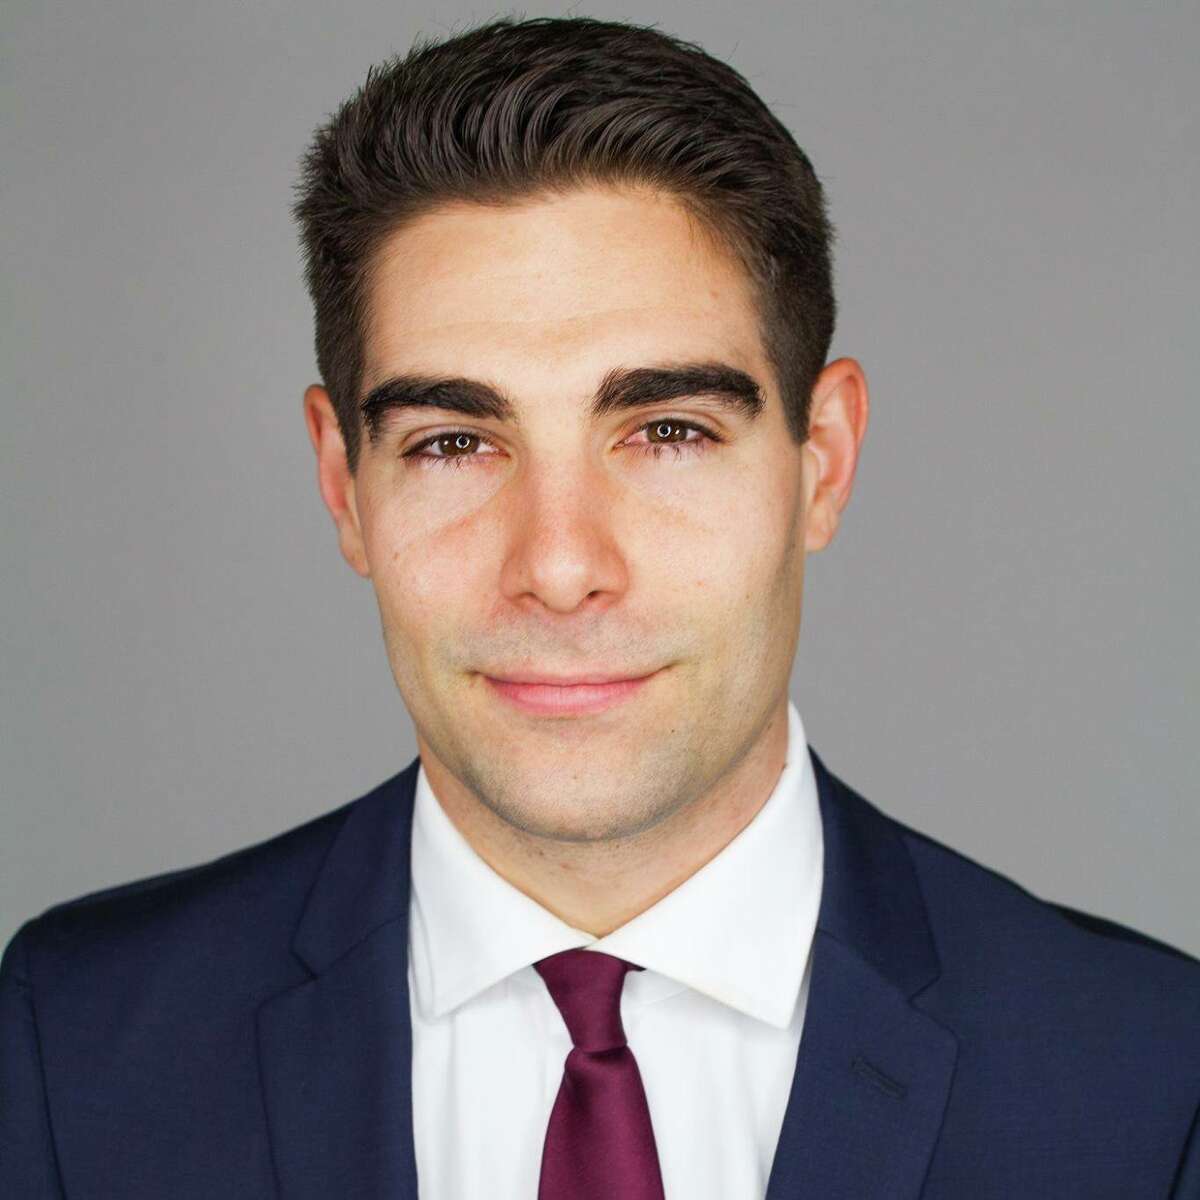 Vincent Crivelli, whose first day at KPRC was Monday, is set make his on-air debut early next week. >>>Click through to see more on Crivelli.